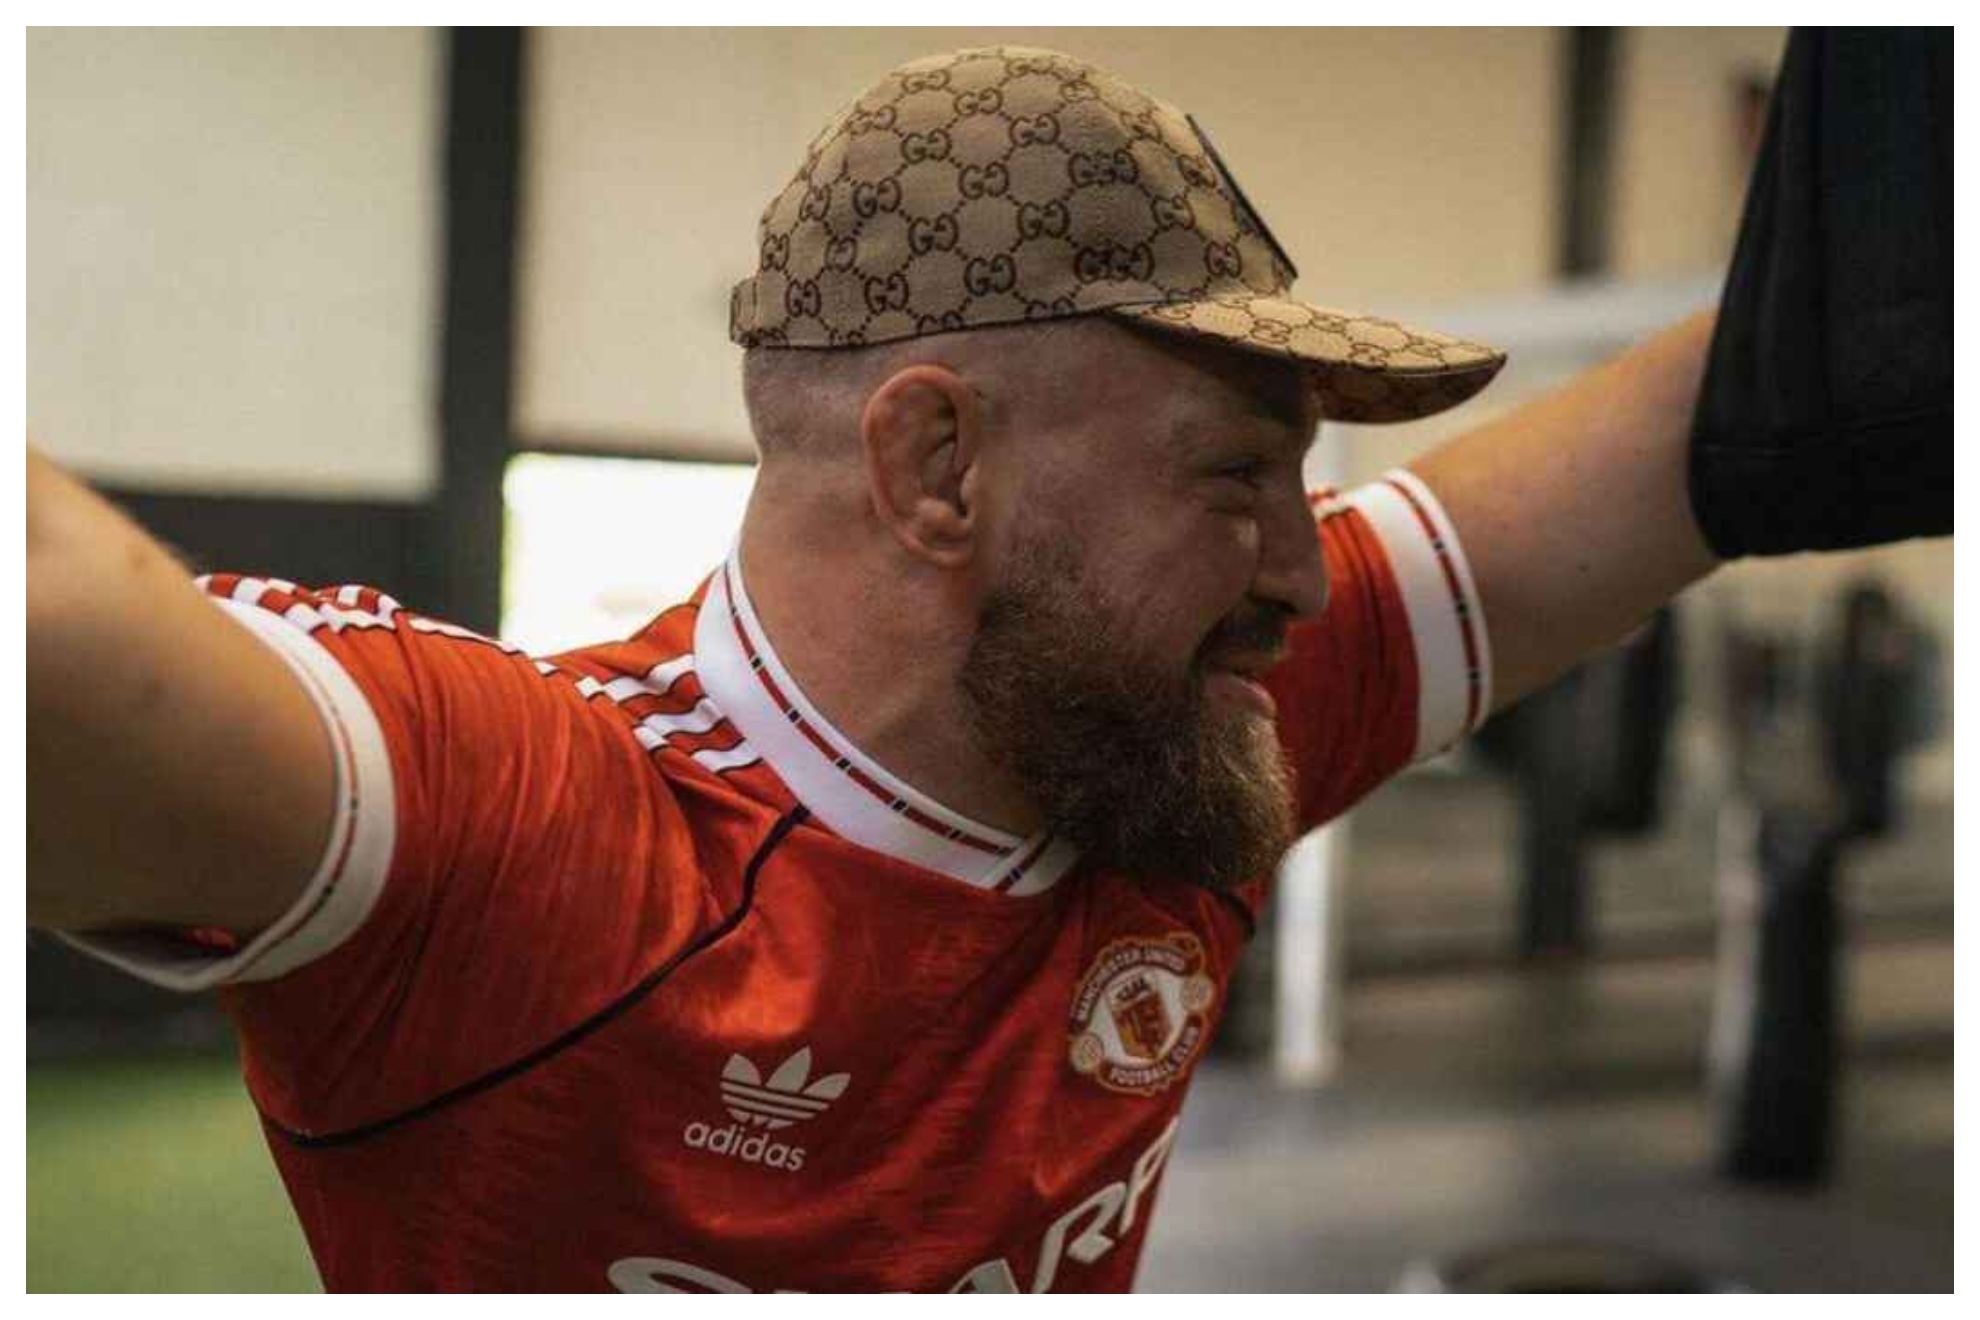 Conor McGregor wearing a Manchester United shirt